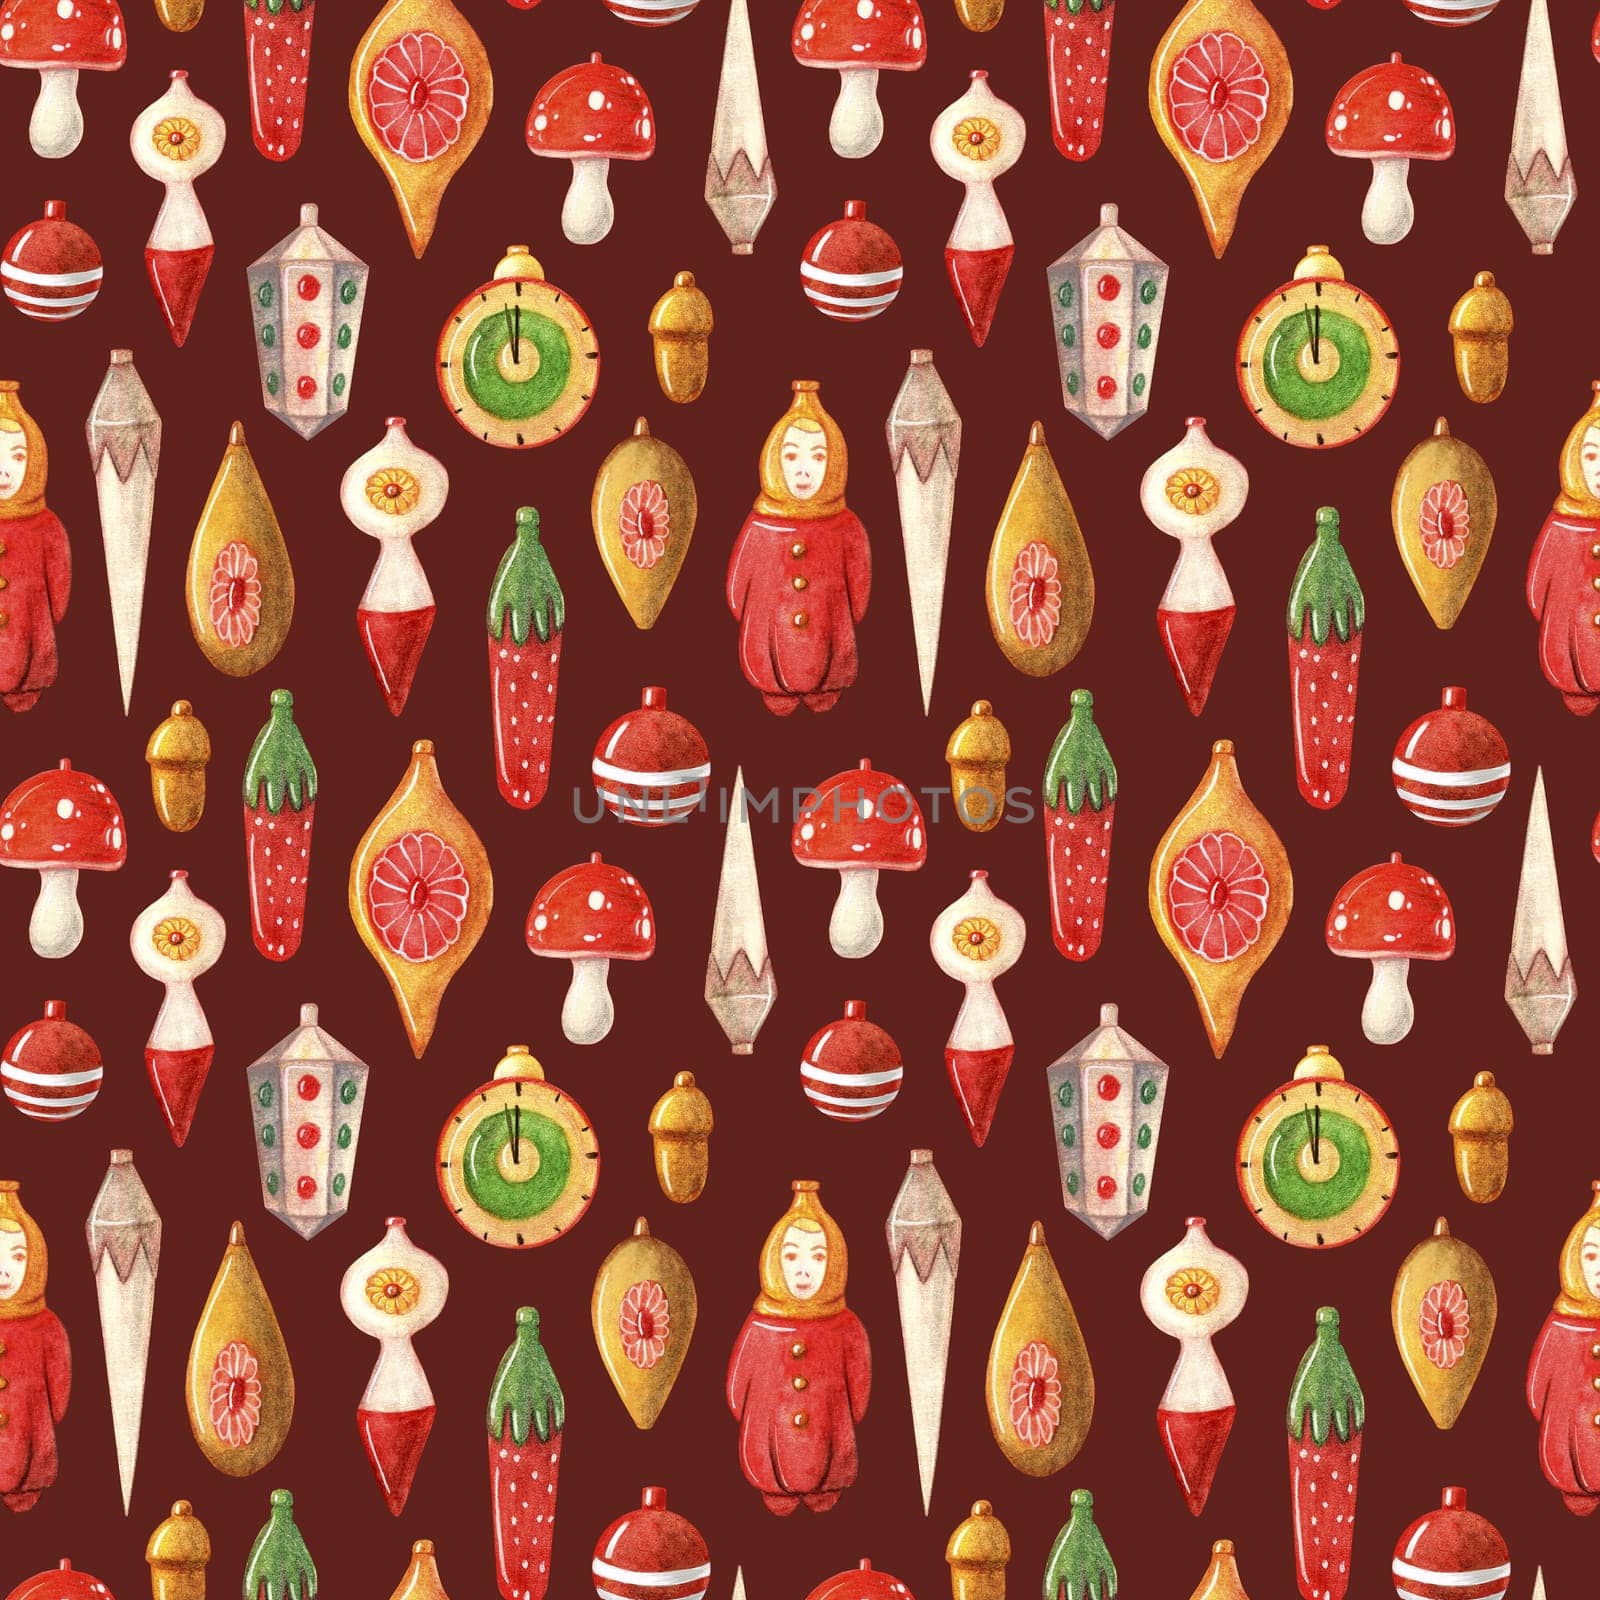 Vintage Christmas toys watercolor seamless pattern. New Year greeting card. It can be used to decorate holiday packages, fabrics, wrapping paper, textiles isolated on dark background.